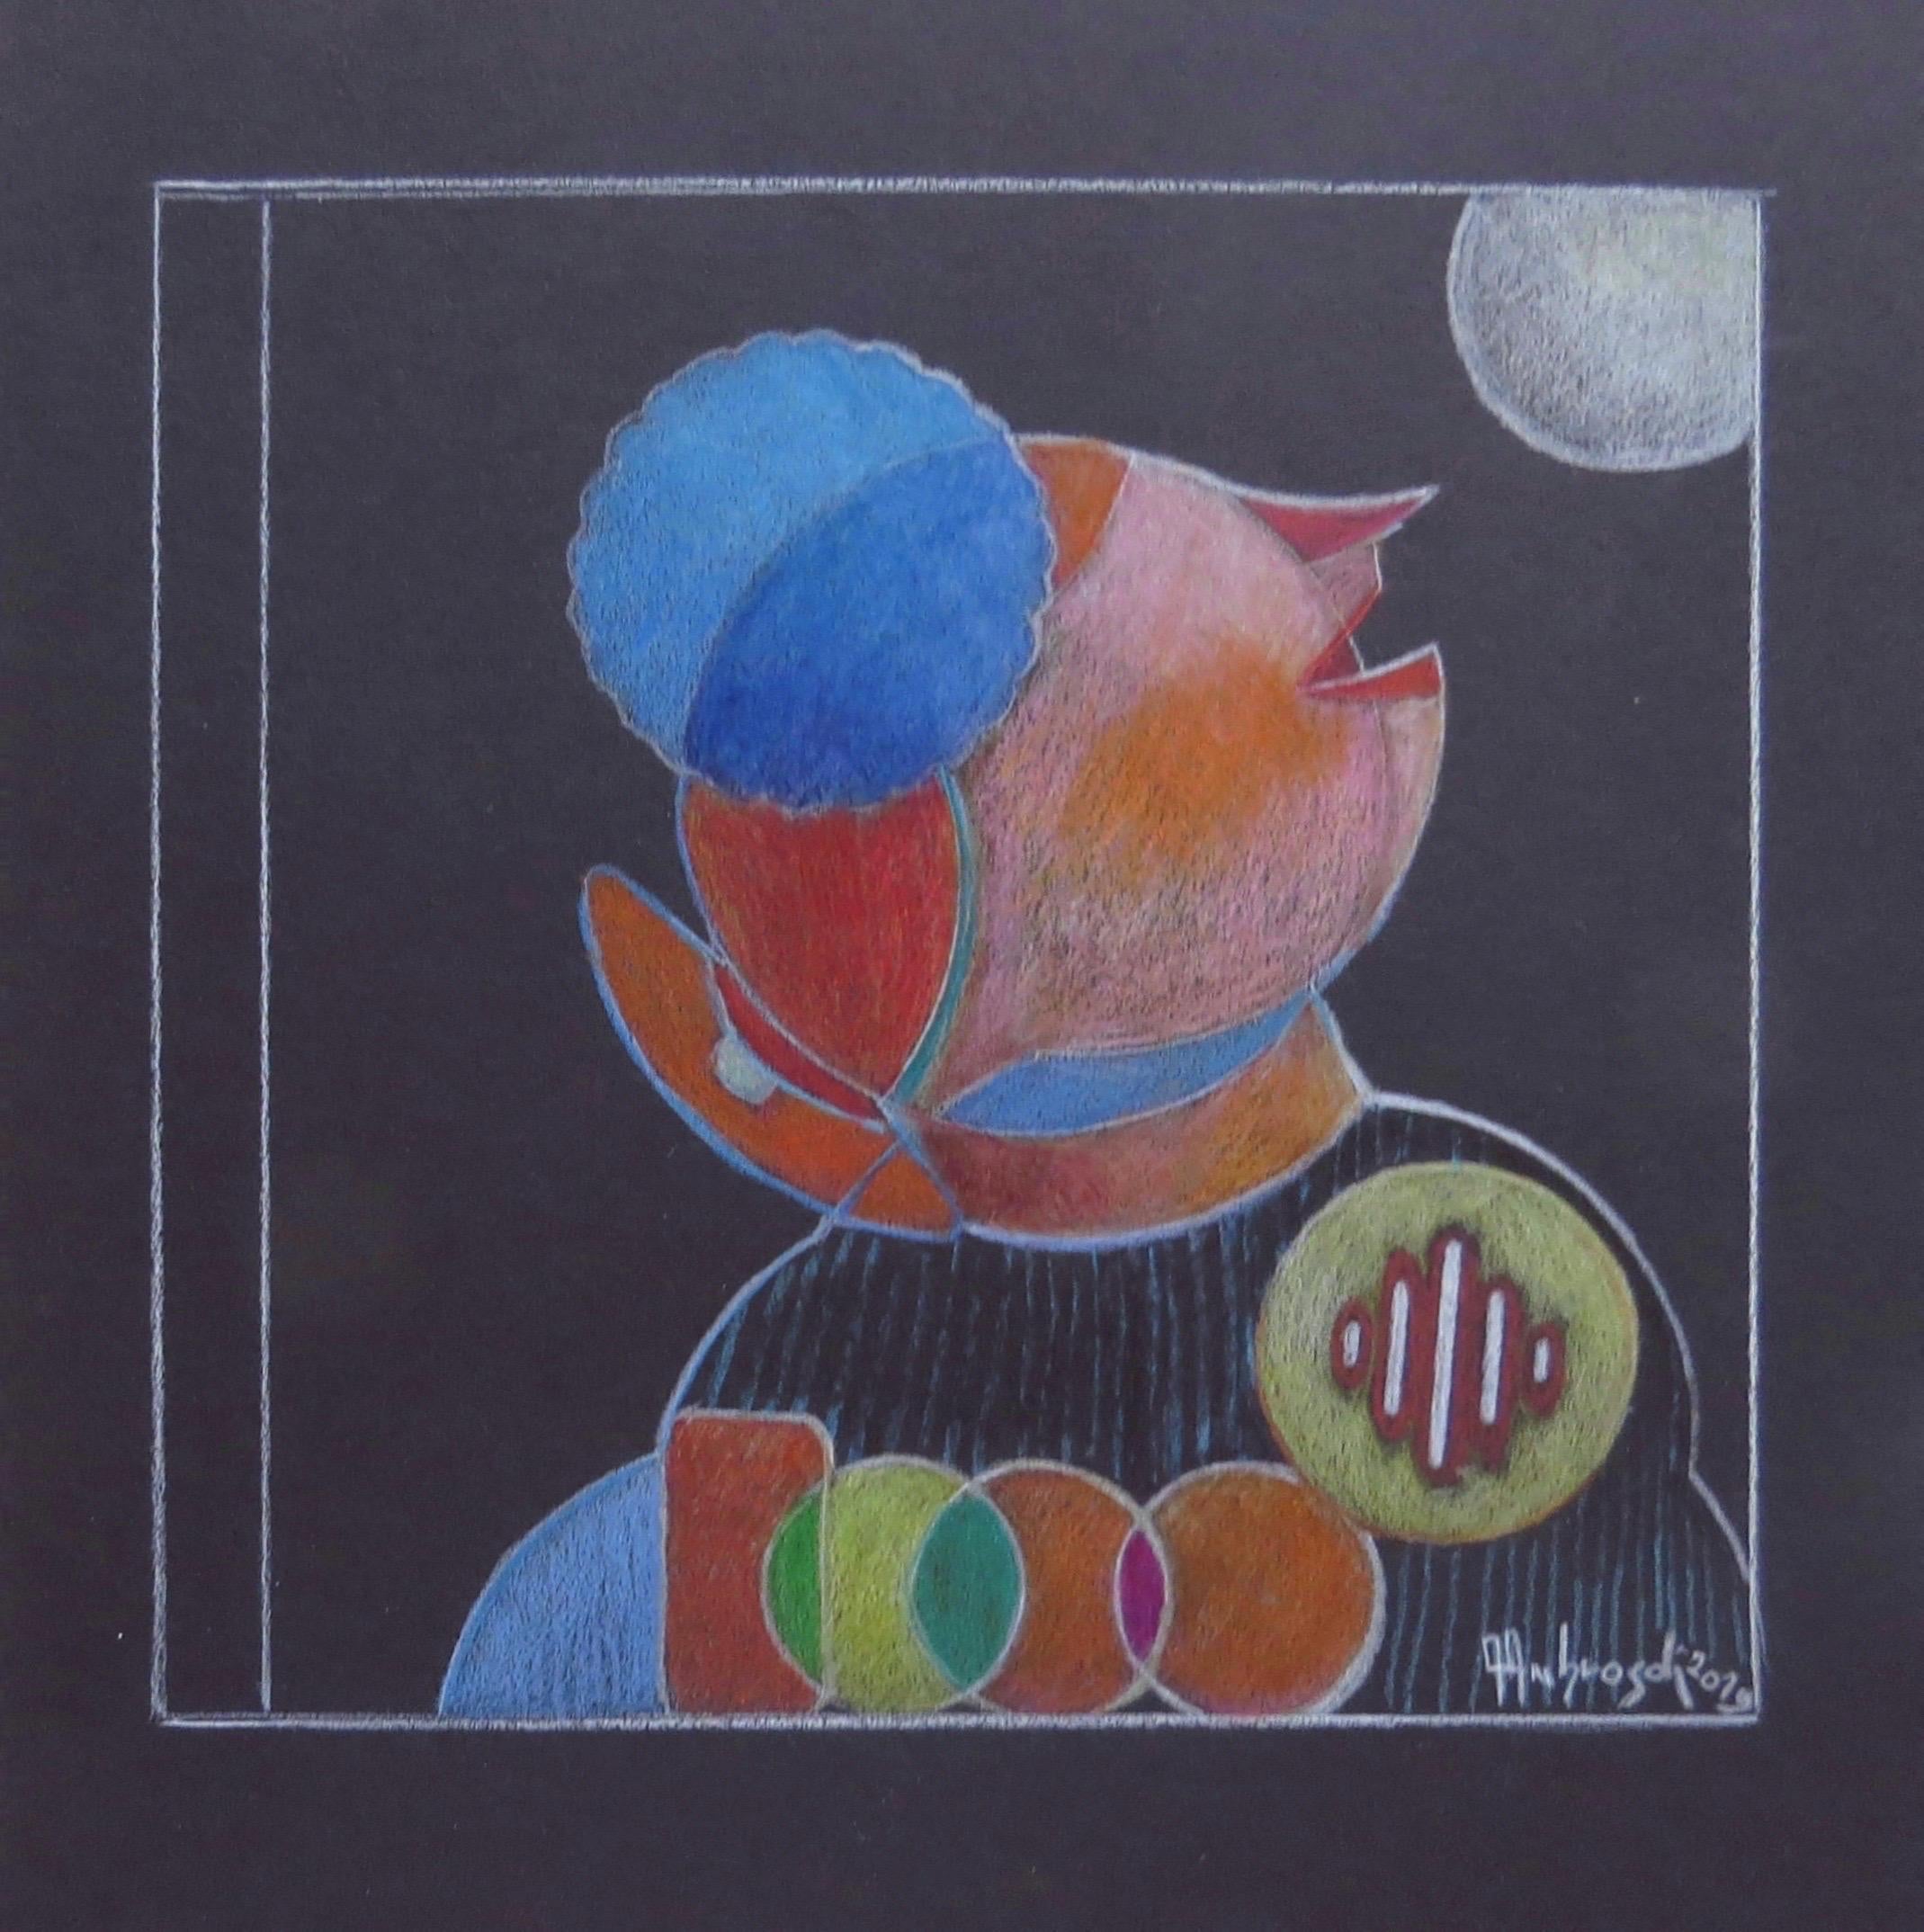 Moonlight (2019) 21x22 cm, by Italian artist Annemarie Ambrosoli, is a colored  pencil drawing  framed with a black passepartout, that measures 29x27 cm
©Annemarie Ambrosoli
This work is a one-of-a-kind piece
It is unframed 
Hand-signed by the